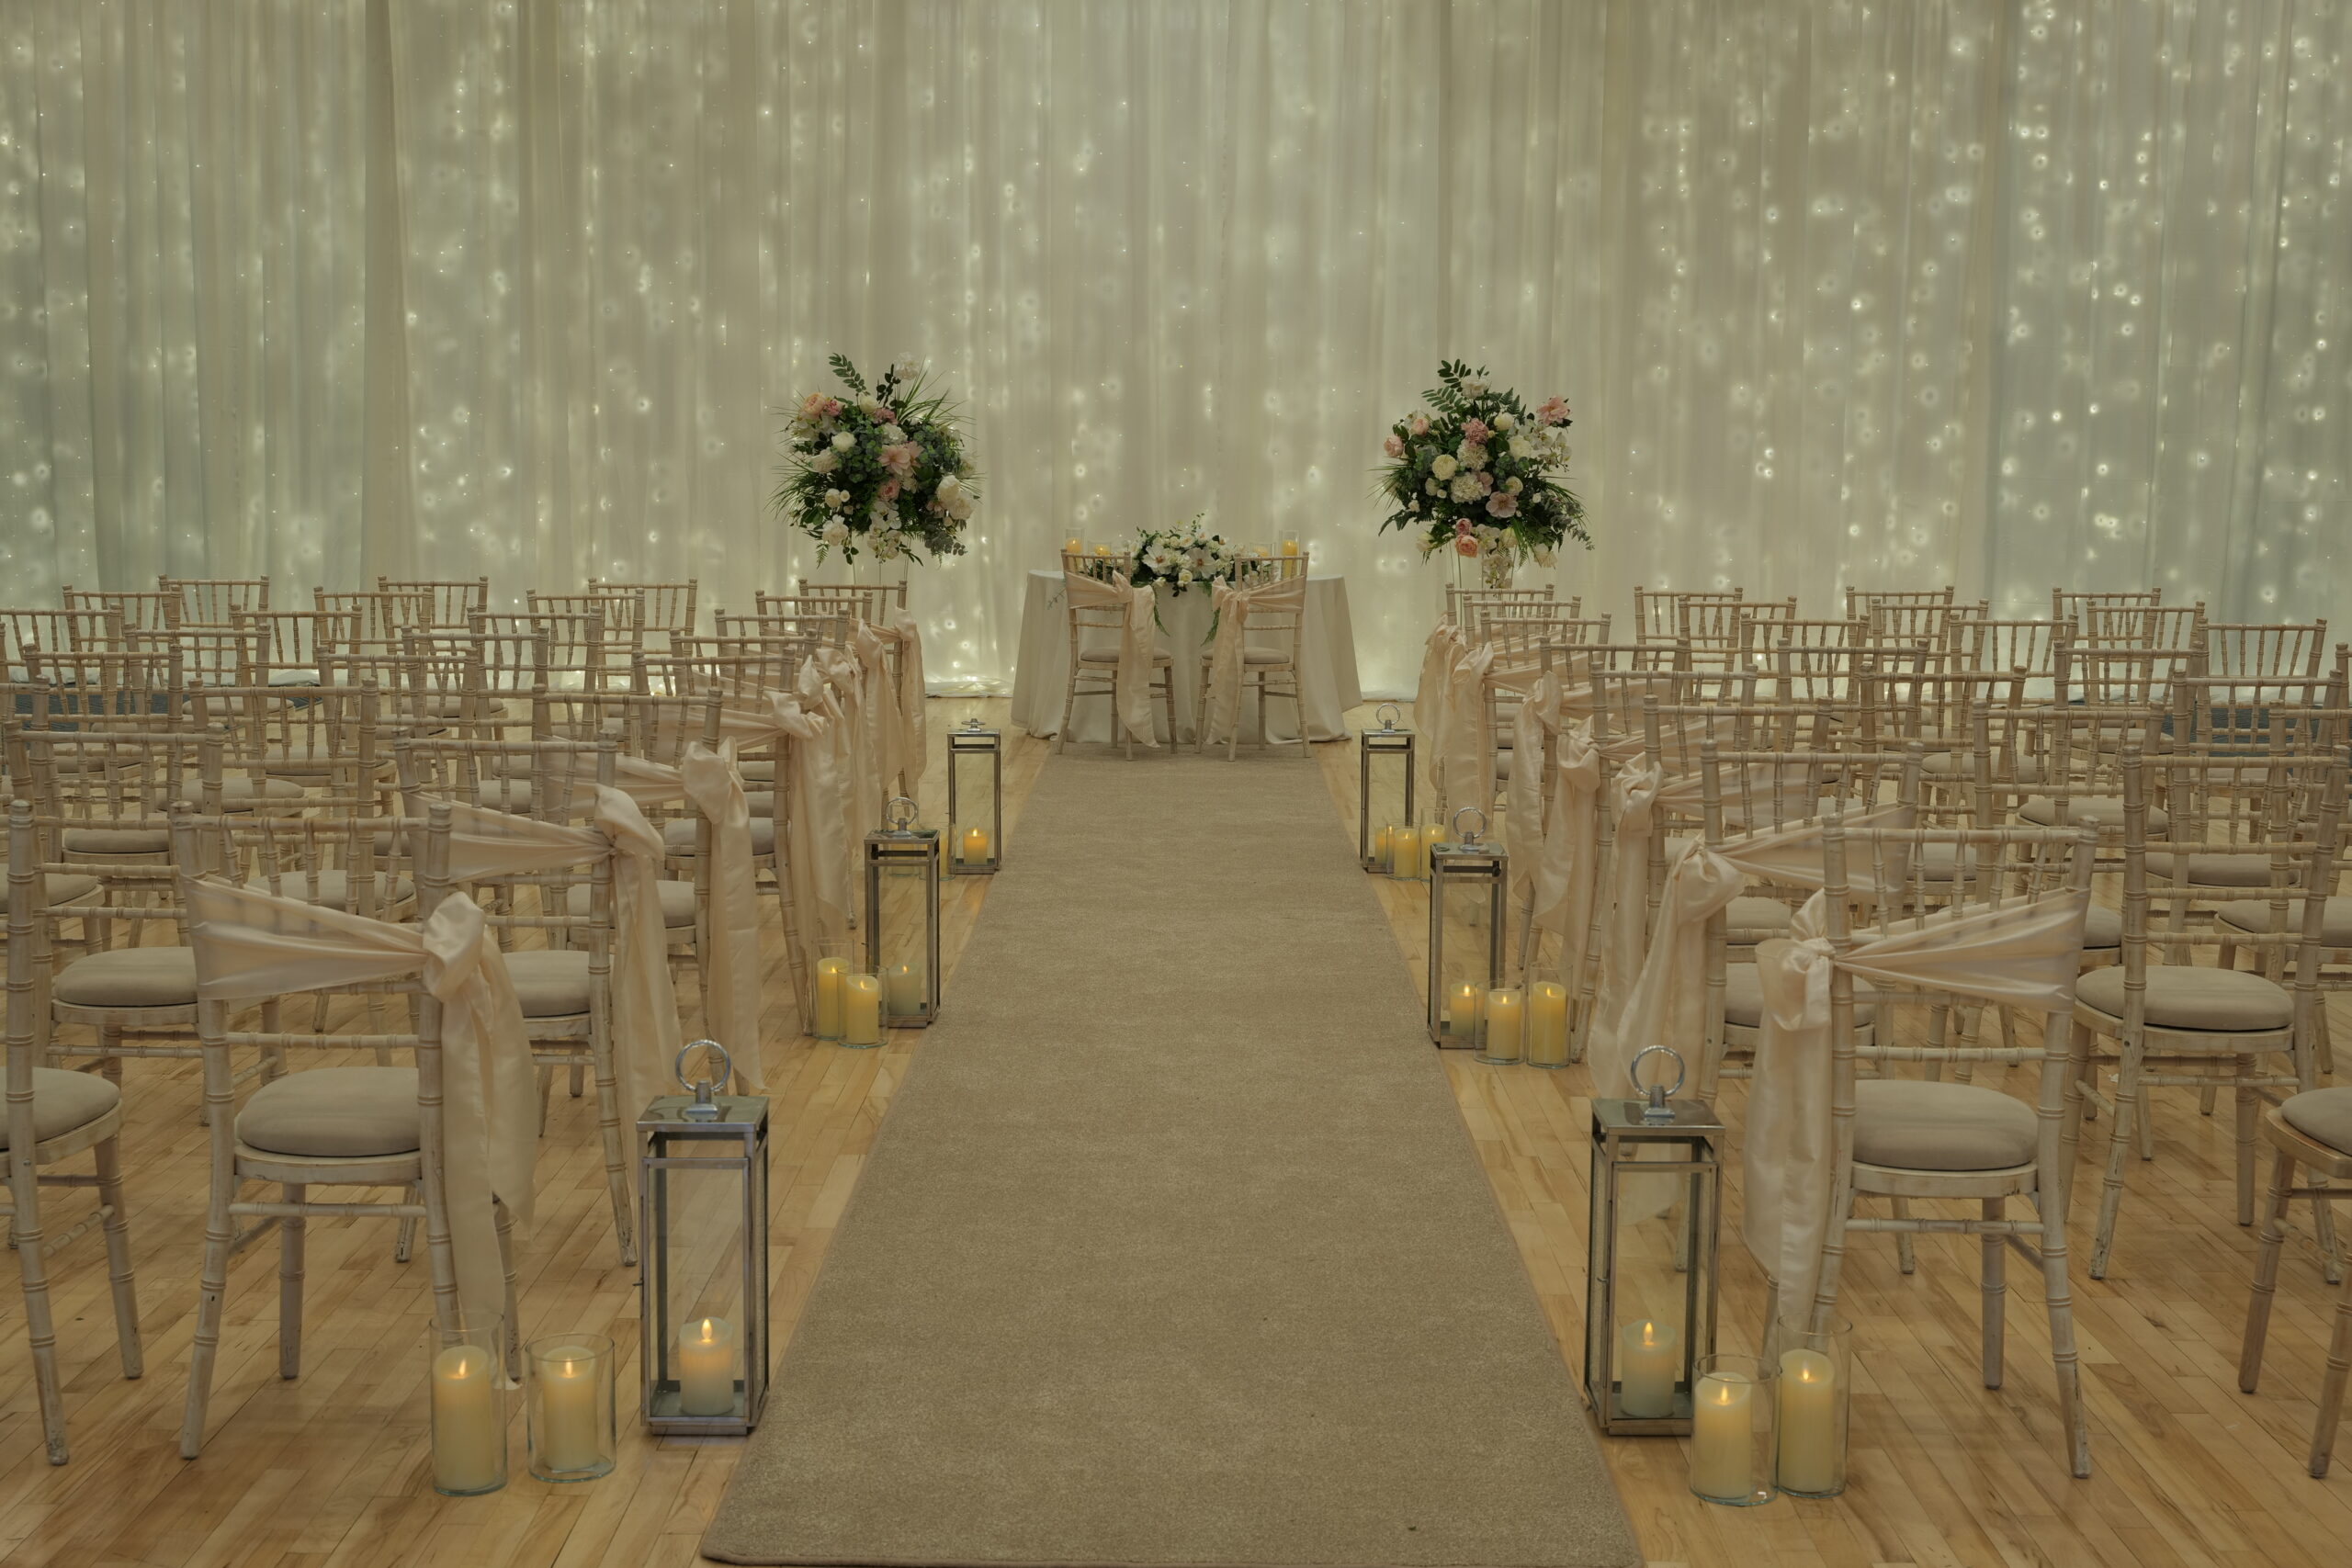 Civil-Ceremony-Aisle-Pairs-Of-Candles-In-Vases-With-Chrome-Floor-Lanterns-Ivory-Carpet-Fairways-Hotel-Dundalk-Co-Louth